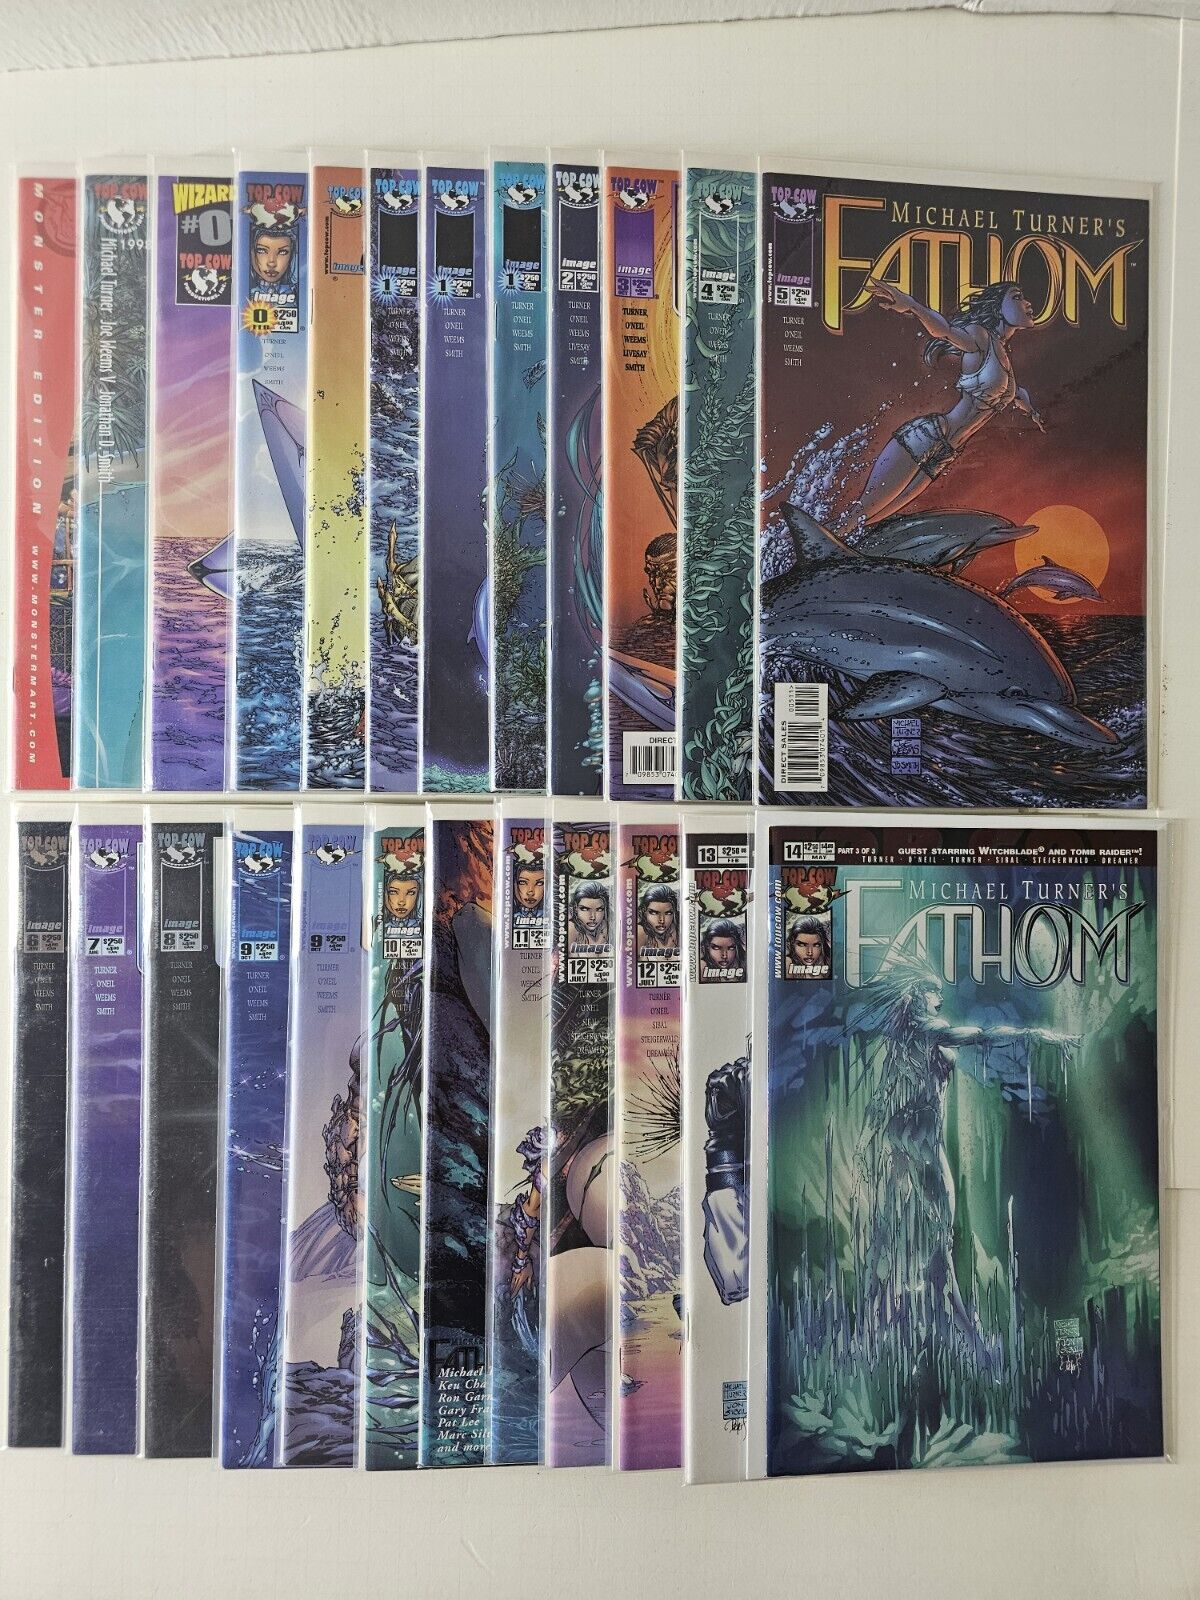 FATHOM Michael Turner Lot Of 24 Comics #0-#14 Swimsuit, Monster, Preview Edition